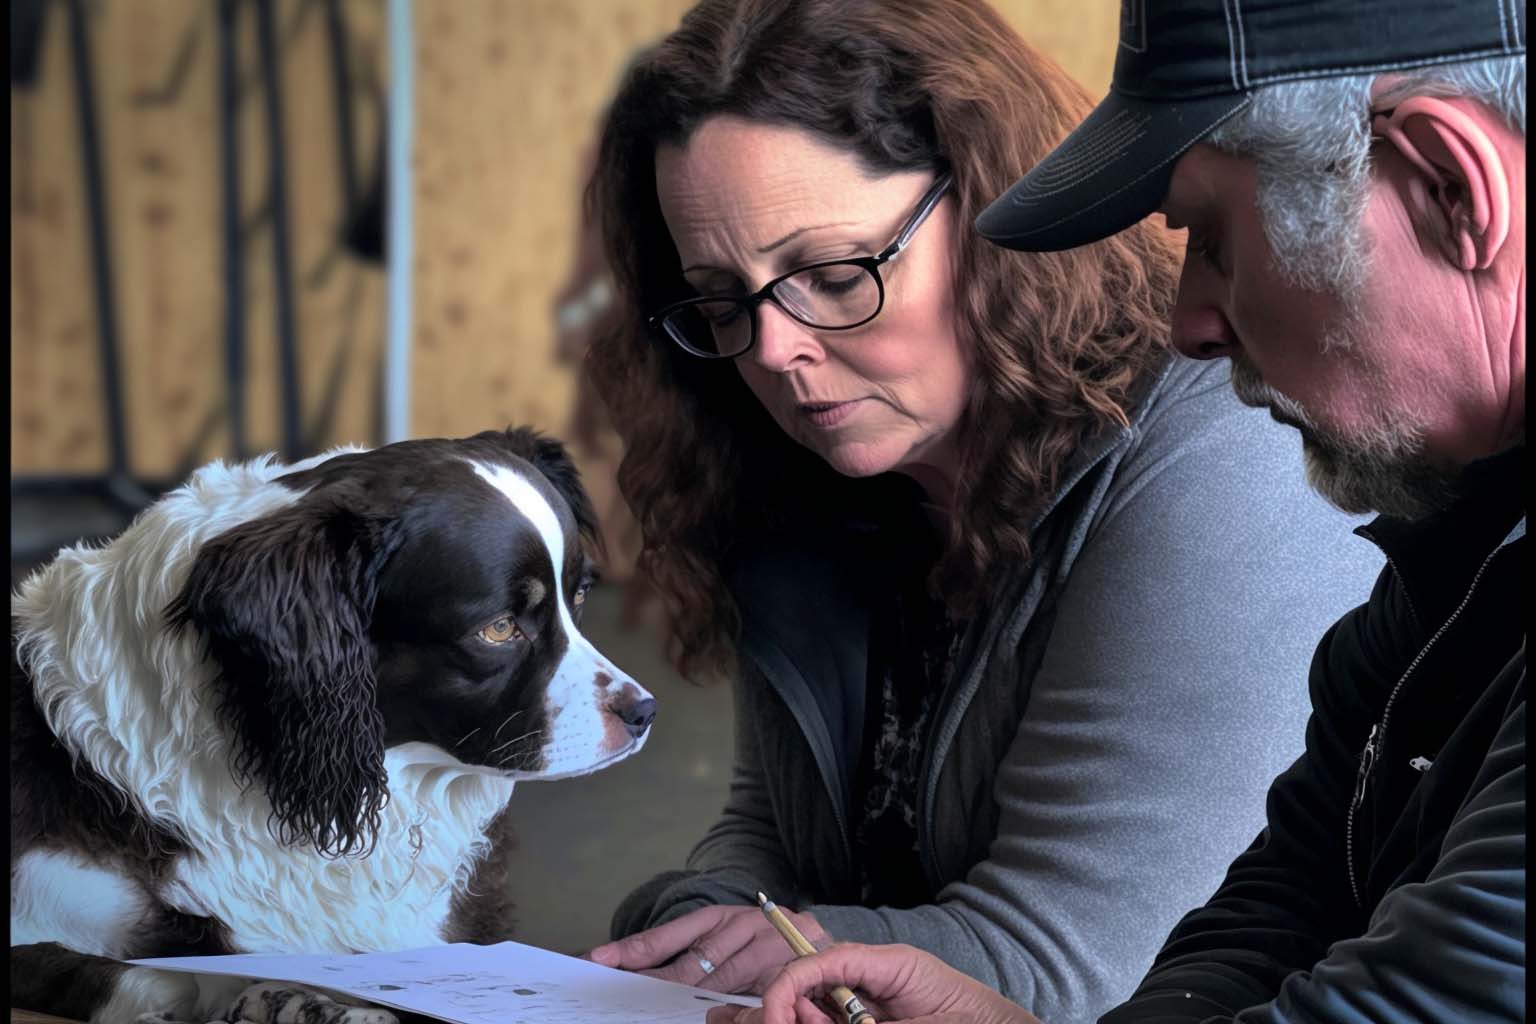 Couple looking at paperwork while dog looks on